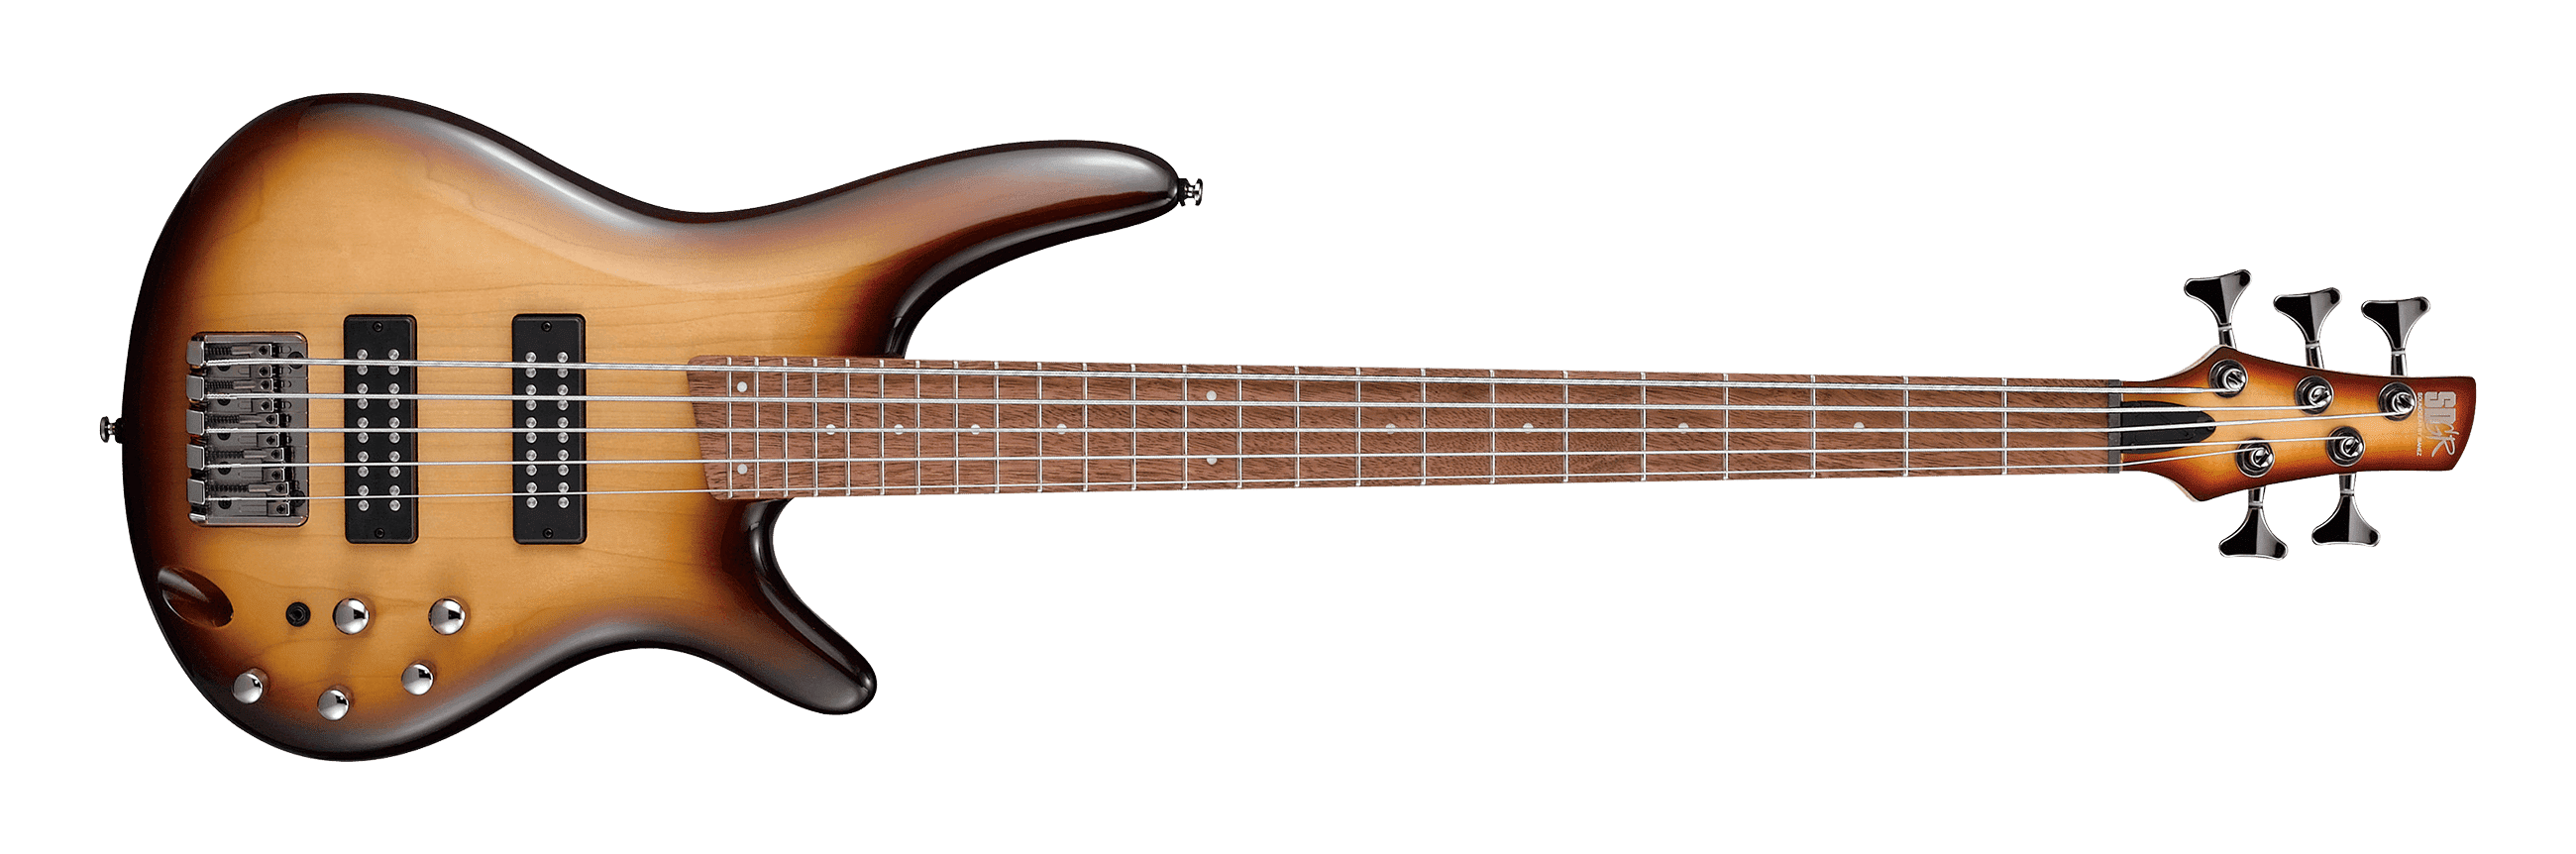 Double-Neck Guitar Background PNG Image